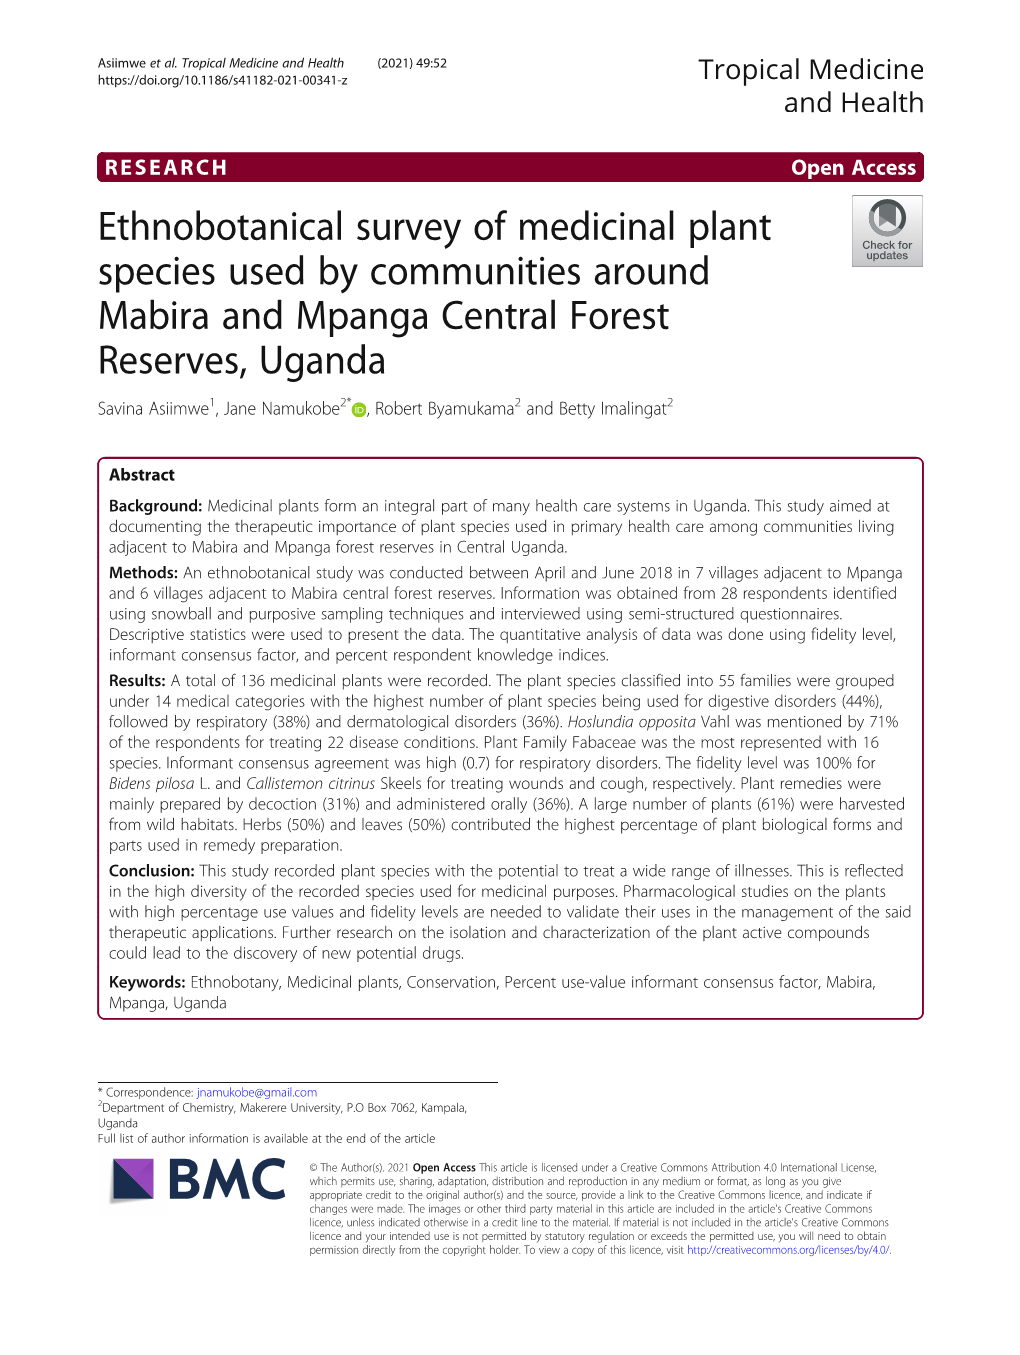 Ethnobotanical Survey of Medicinal Plant Species Used by Communities